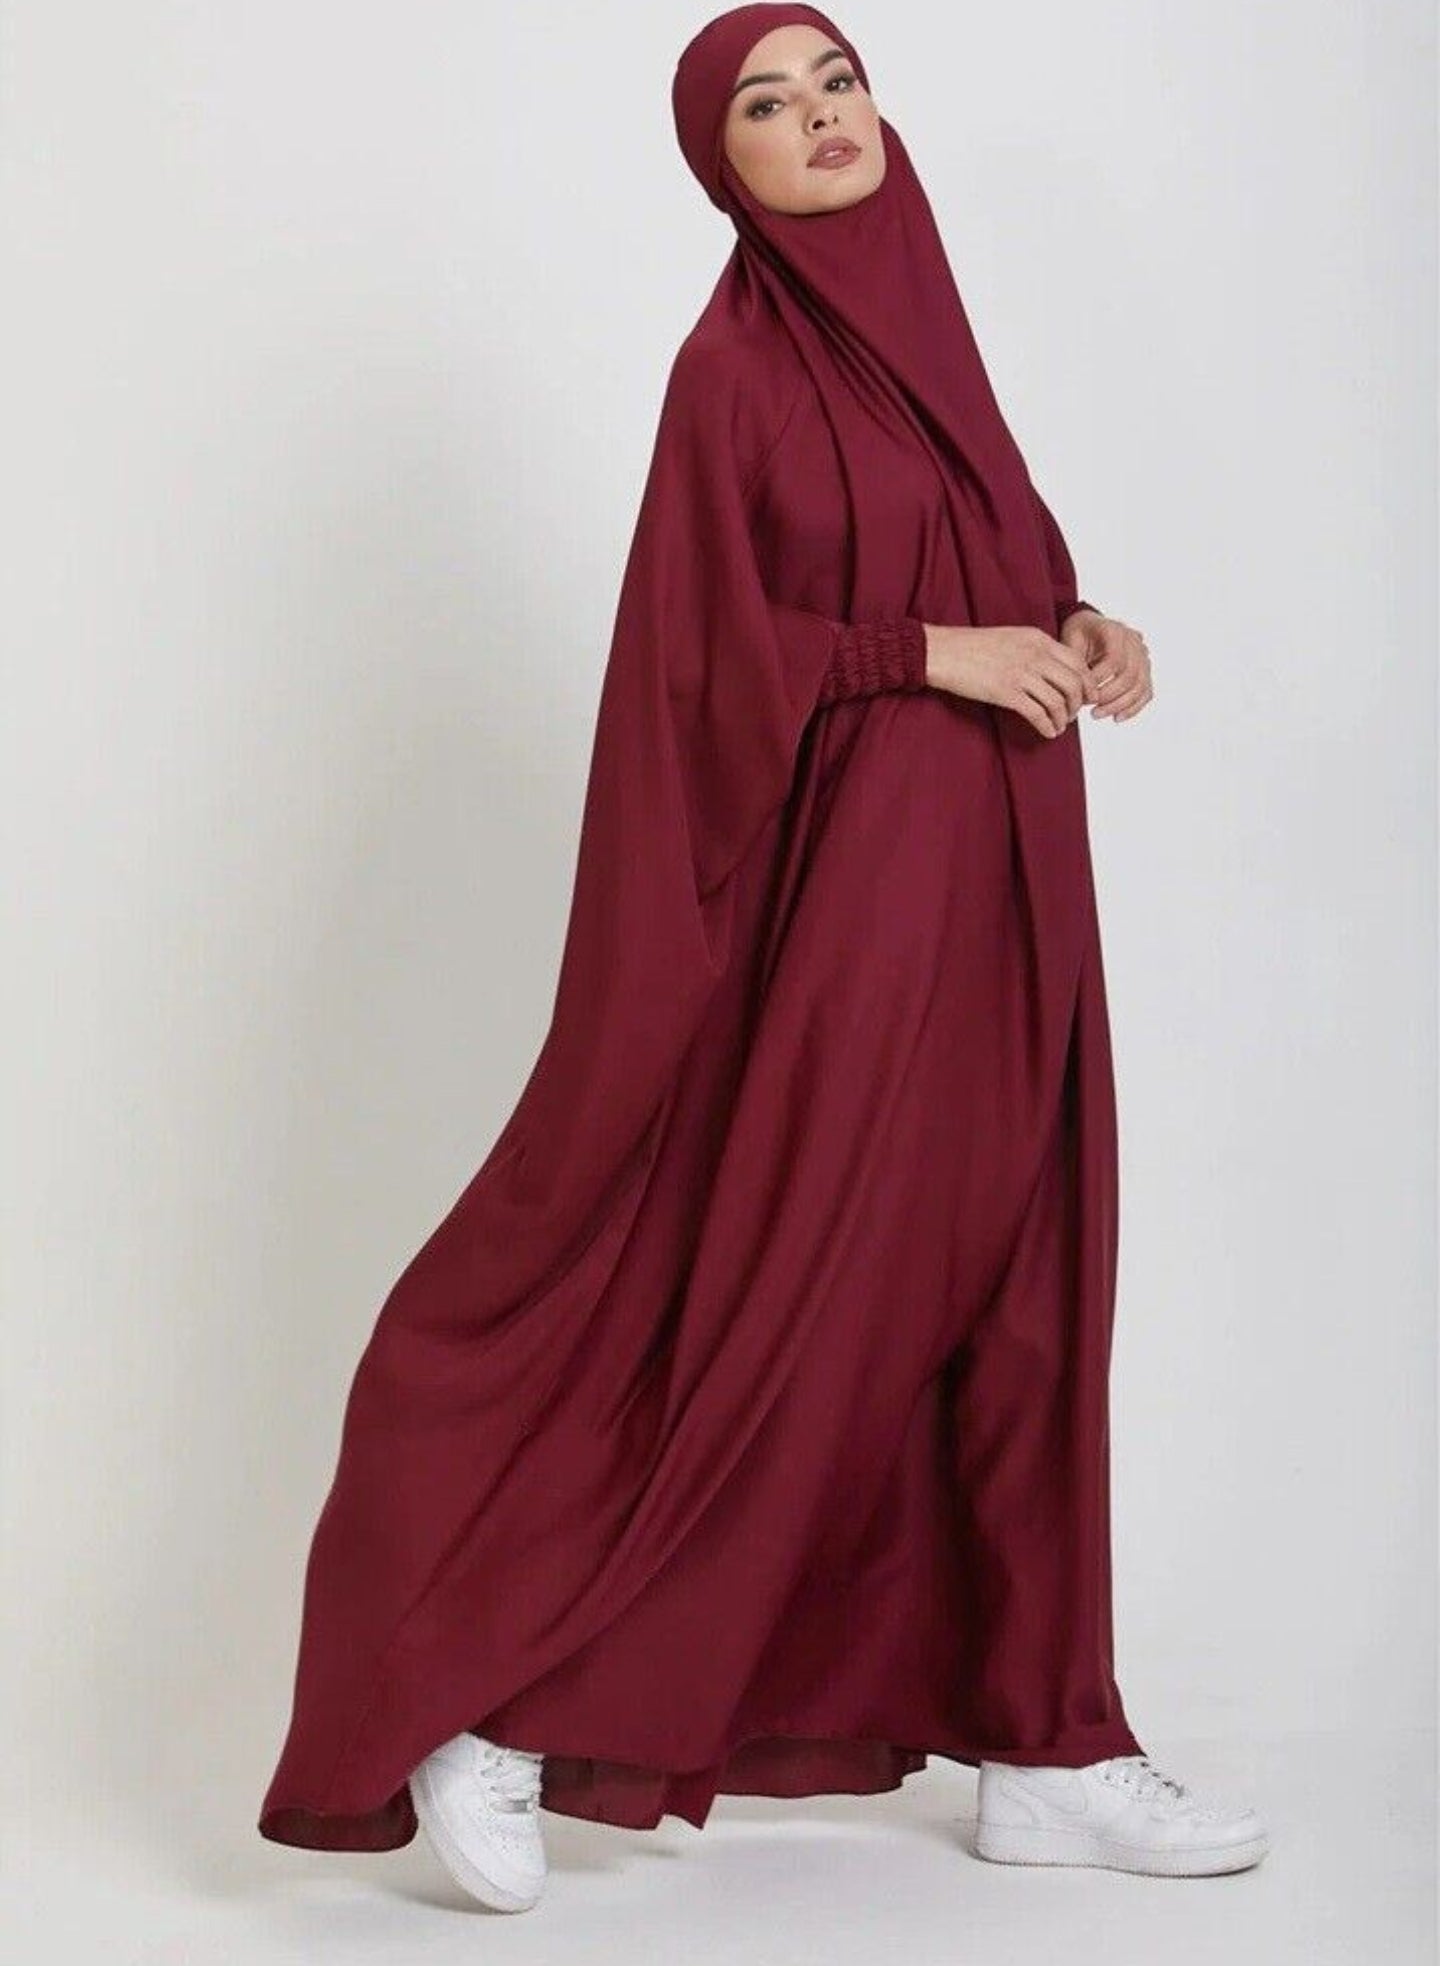 Step into regal elegance with our Maroon One Piece Tie-Up Jilbab. Meticulously designed for confident and beautiful prayer moments, this exclusive Islamic garment combines enduring modesty with opulent style. Explore the regal side of prayer wear at Hikmah Boutique.